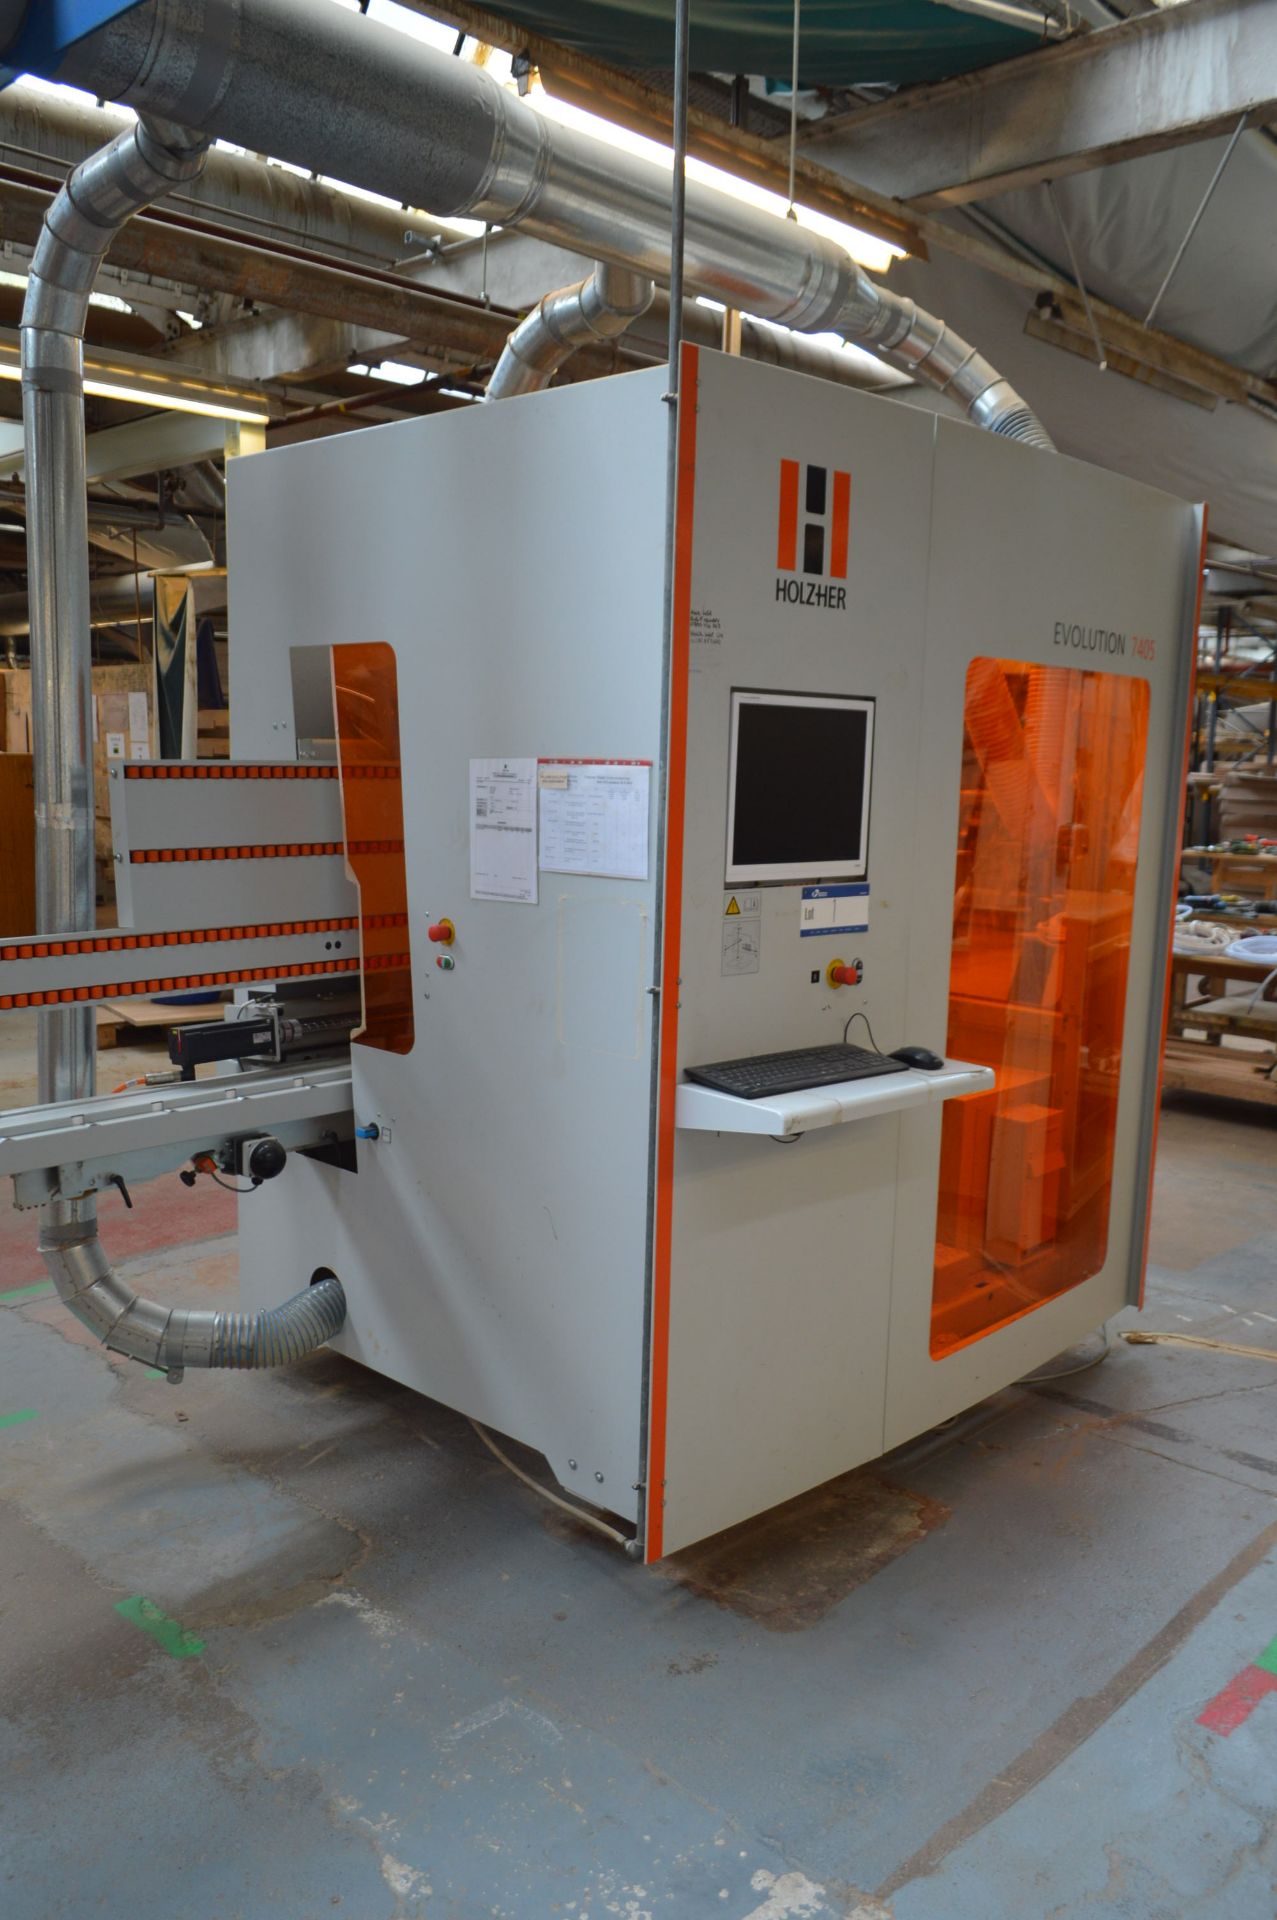 Holz-Her EVOLUTION 7405 CNC PROCESSING CENTRE, serial No. 199/1-407, year of manufacture 2014,